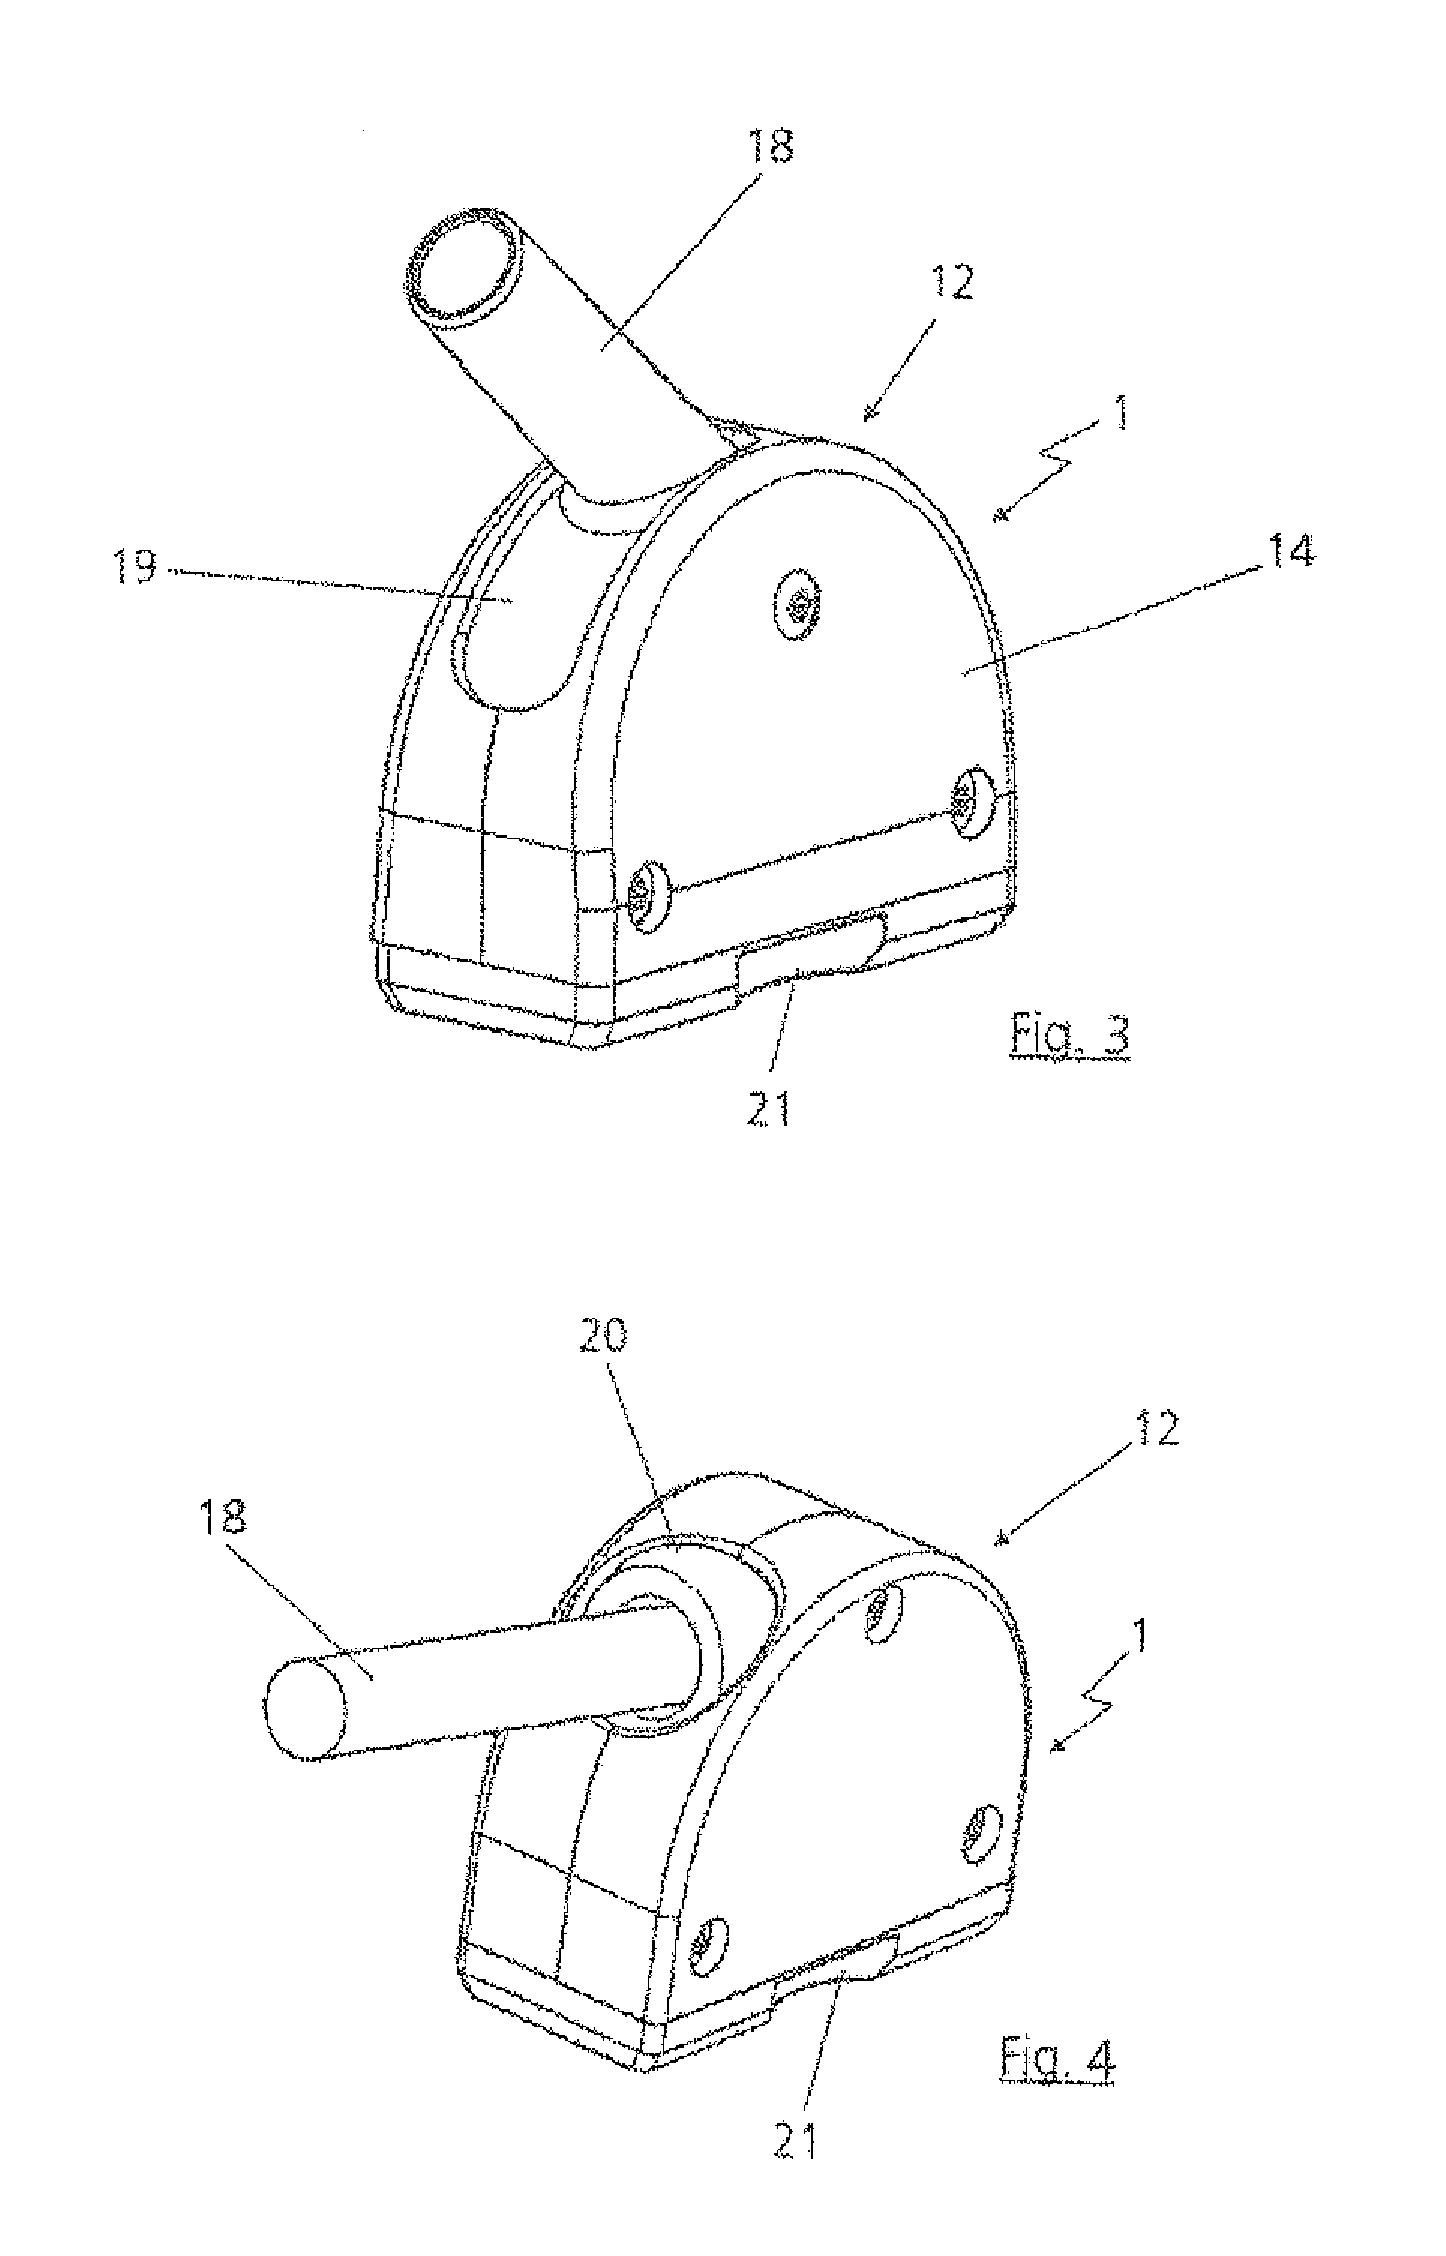 Electrical connection apparatus